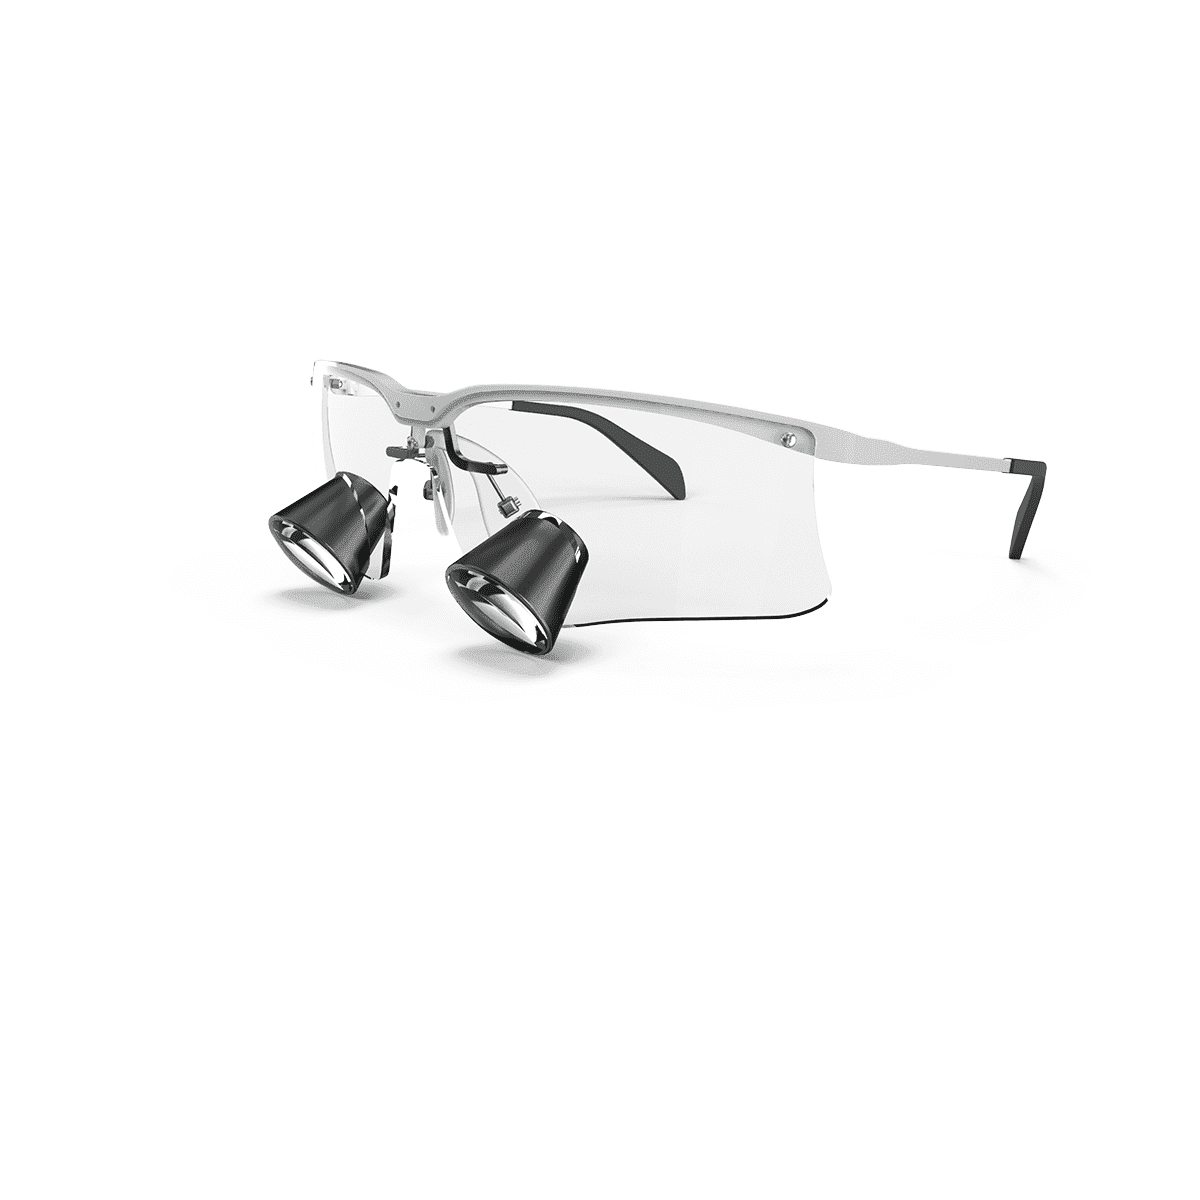 The Loupes Company - TTL Loupes, High quality, lightweight dental and  surgical loupes